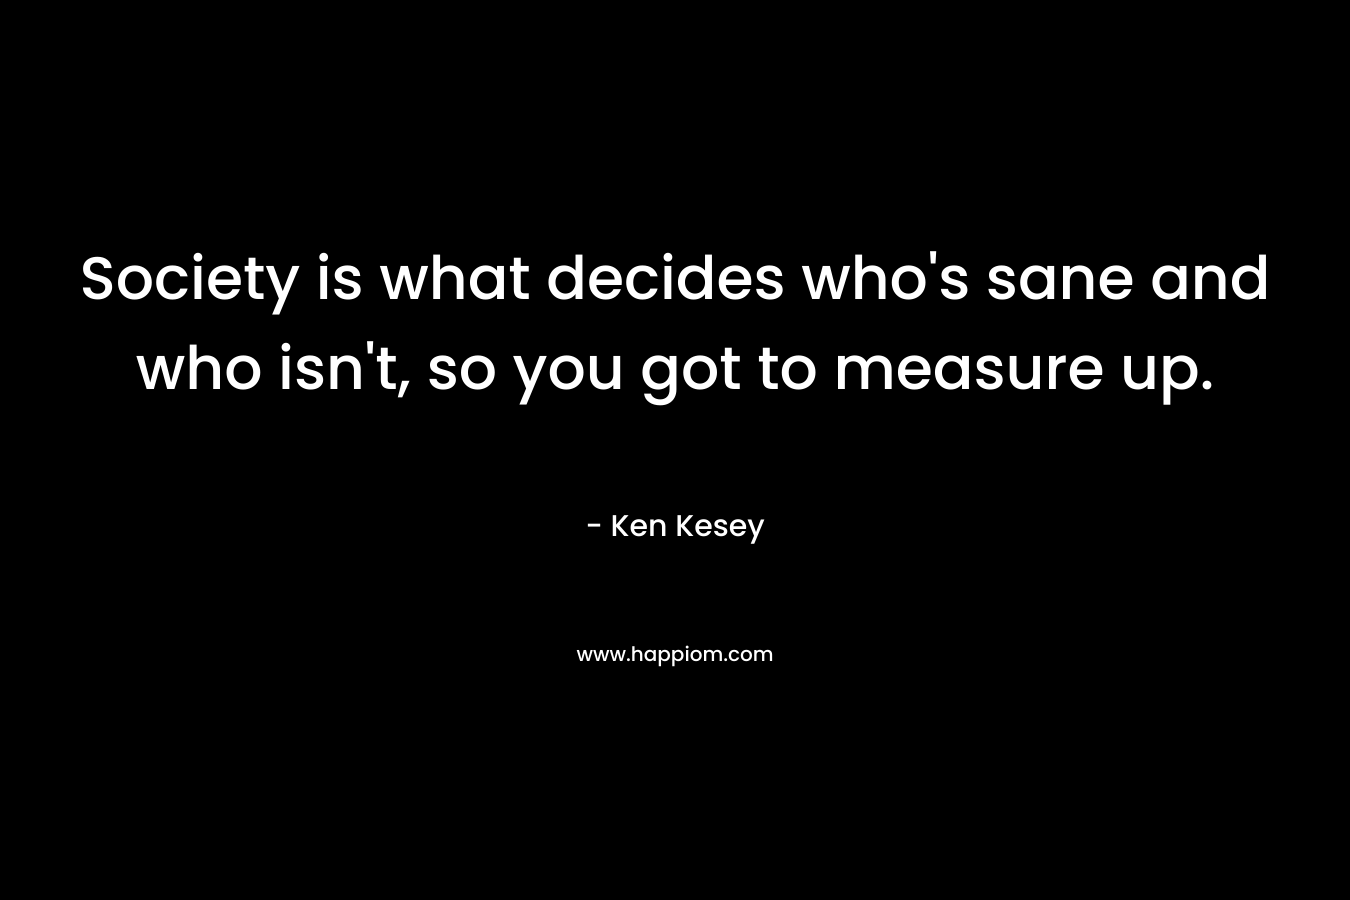 Society is what decides who’s sane and who isn’t, so you got to measure up. – Ken Kesey